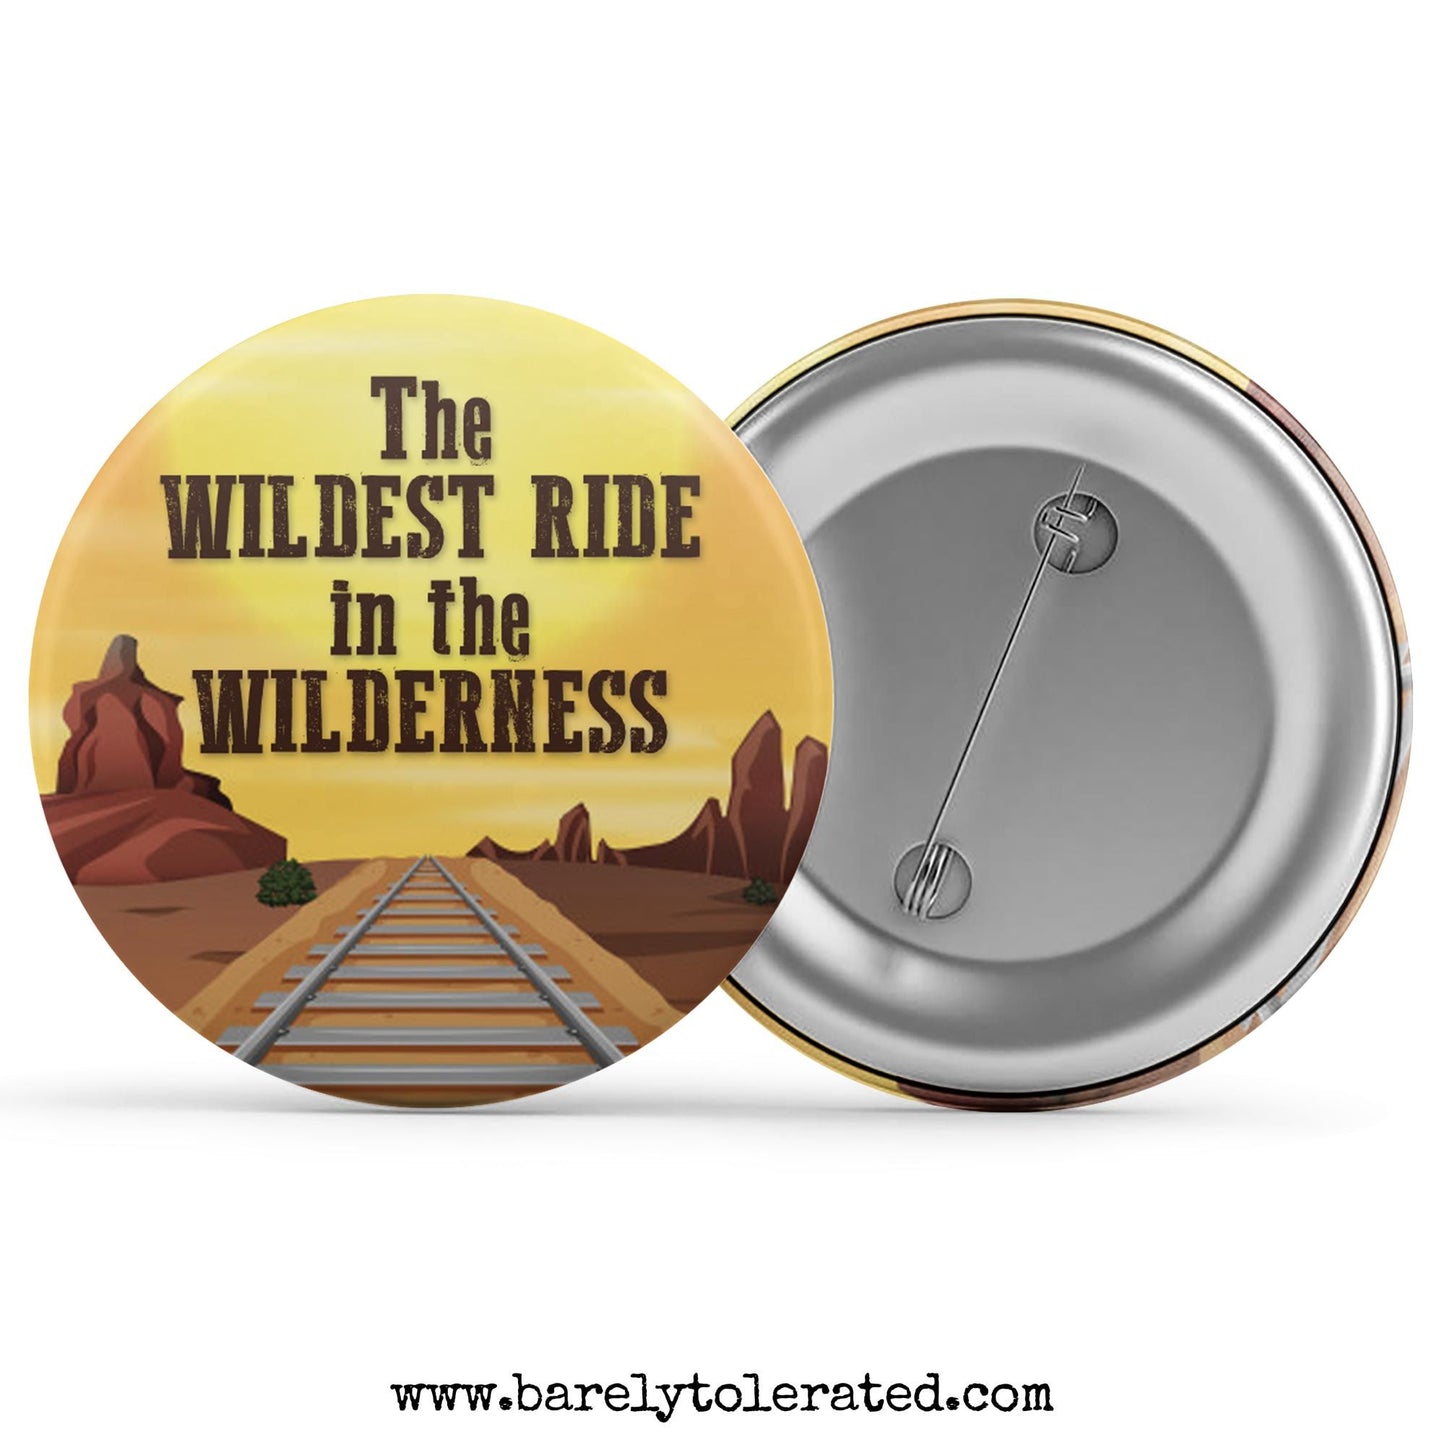 The Wildest Ride in the WIlderness Image